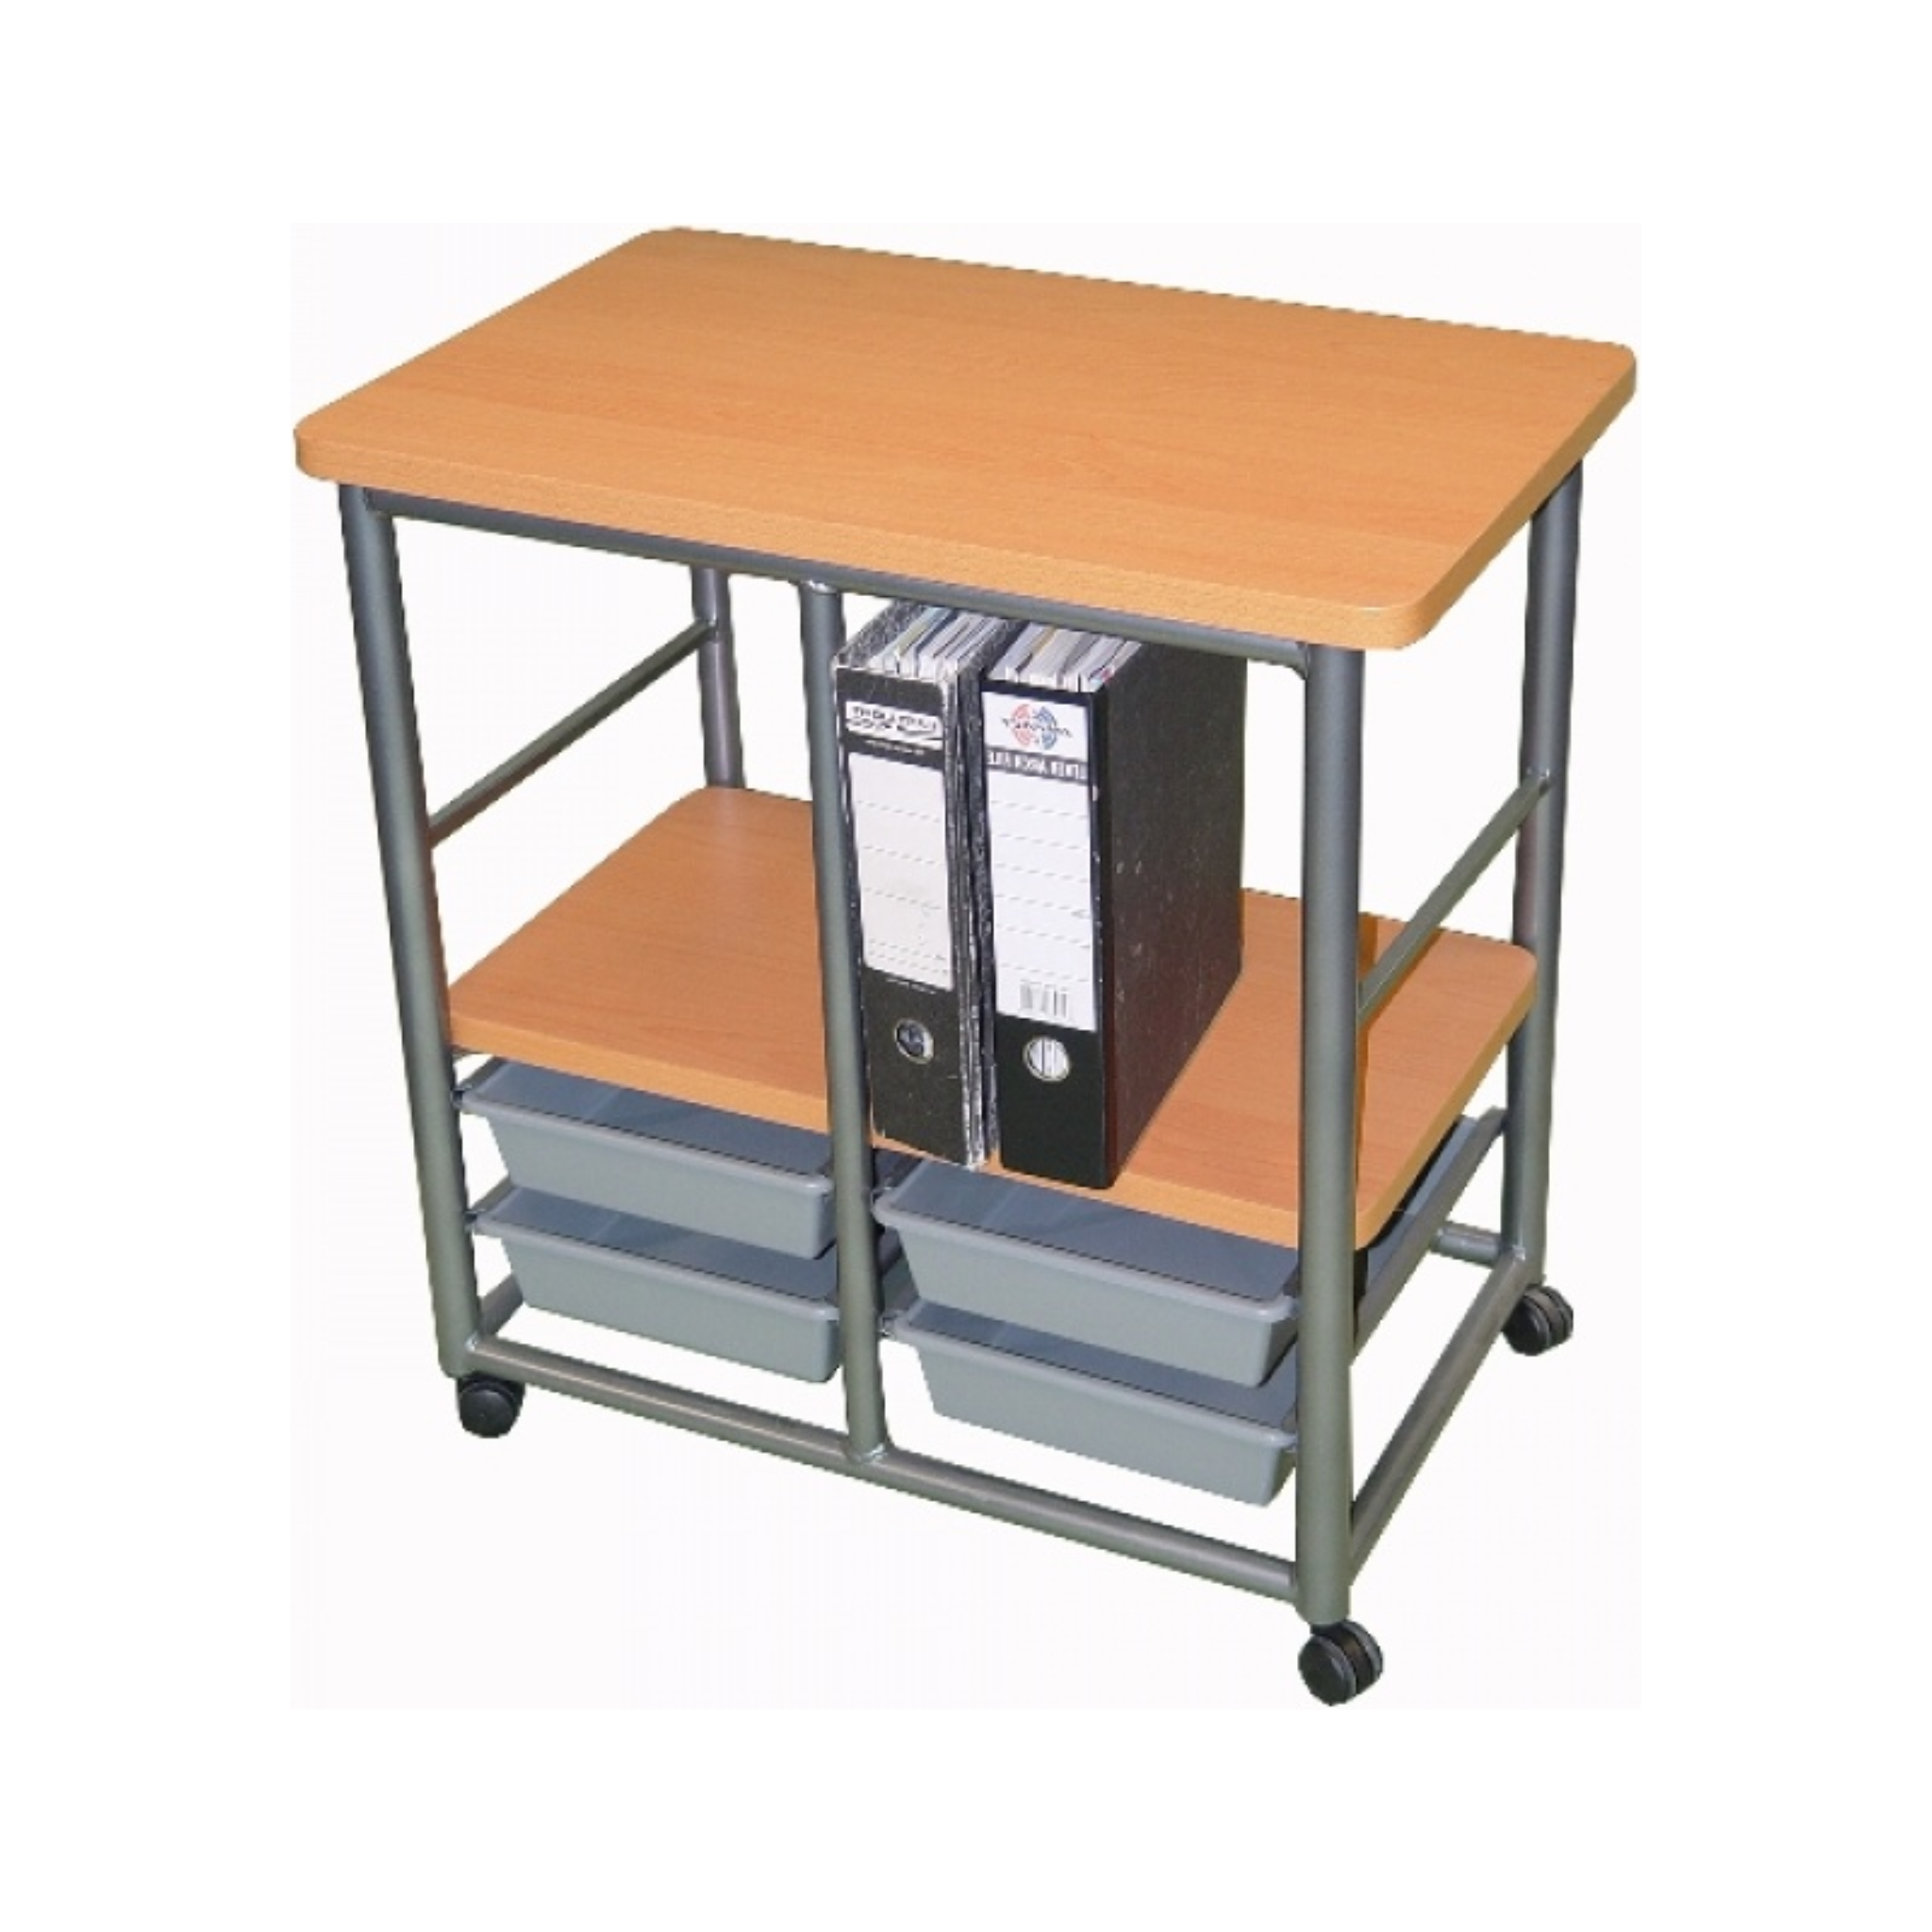 Mobile storage trolley with melteca top and shelf and 4 tote trays